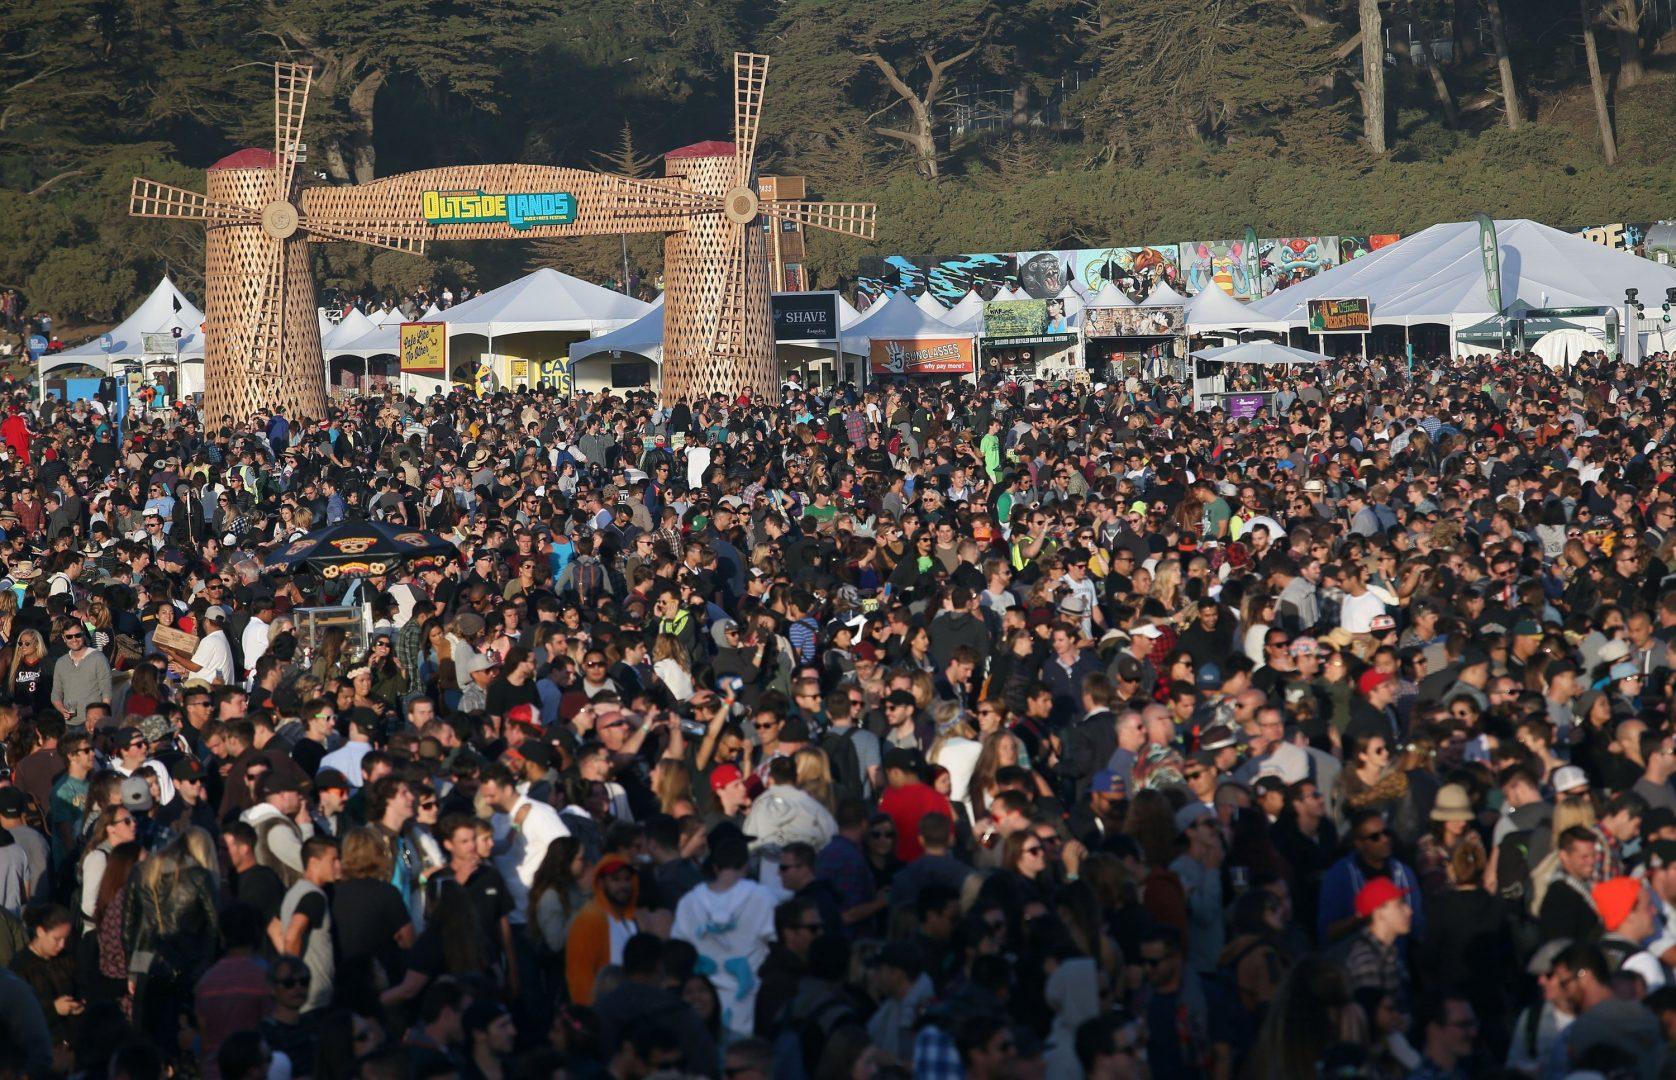 A view of the crowd at the Land’s End stage during day one of the Outside Lands music festival at Golden Gate Park on August 8, 2014. The festival runs through Sunday.  
Jane Tyska/Bay Area News Group/TNS